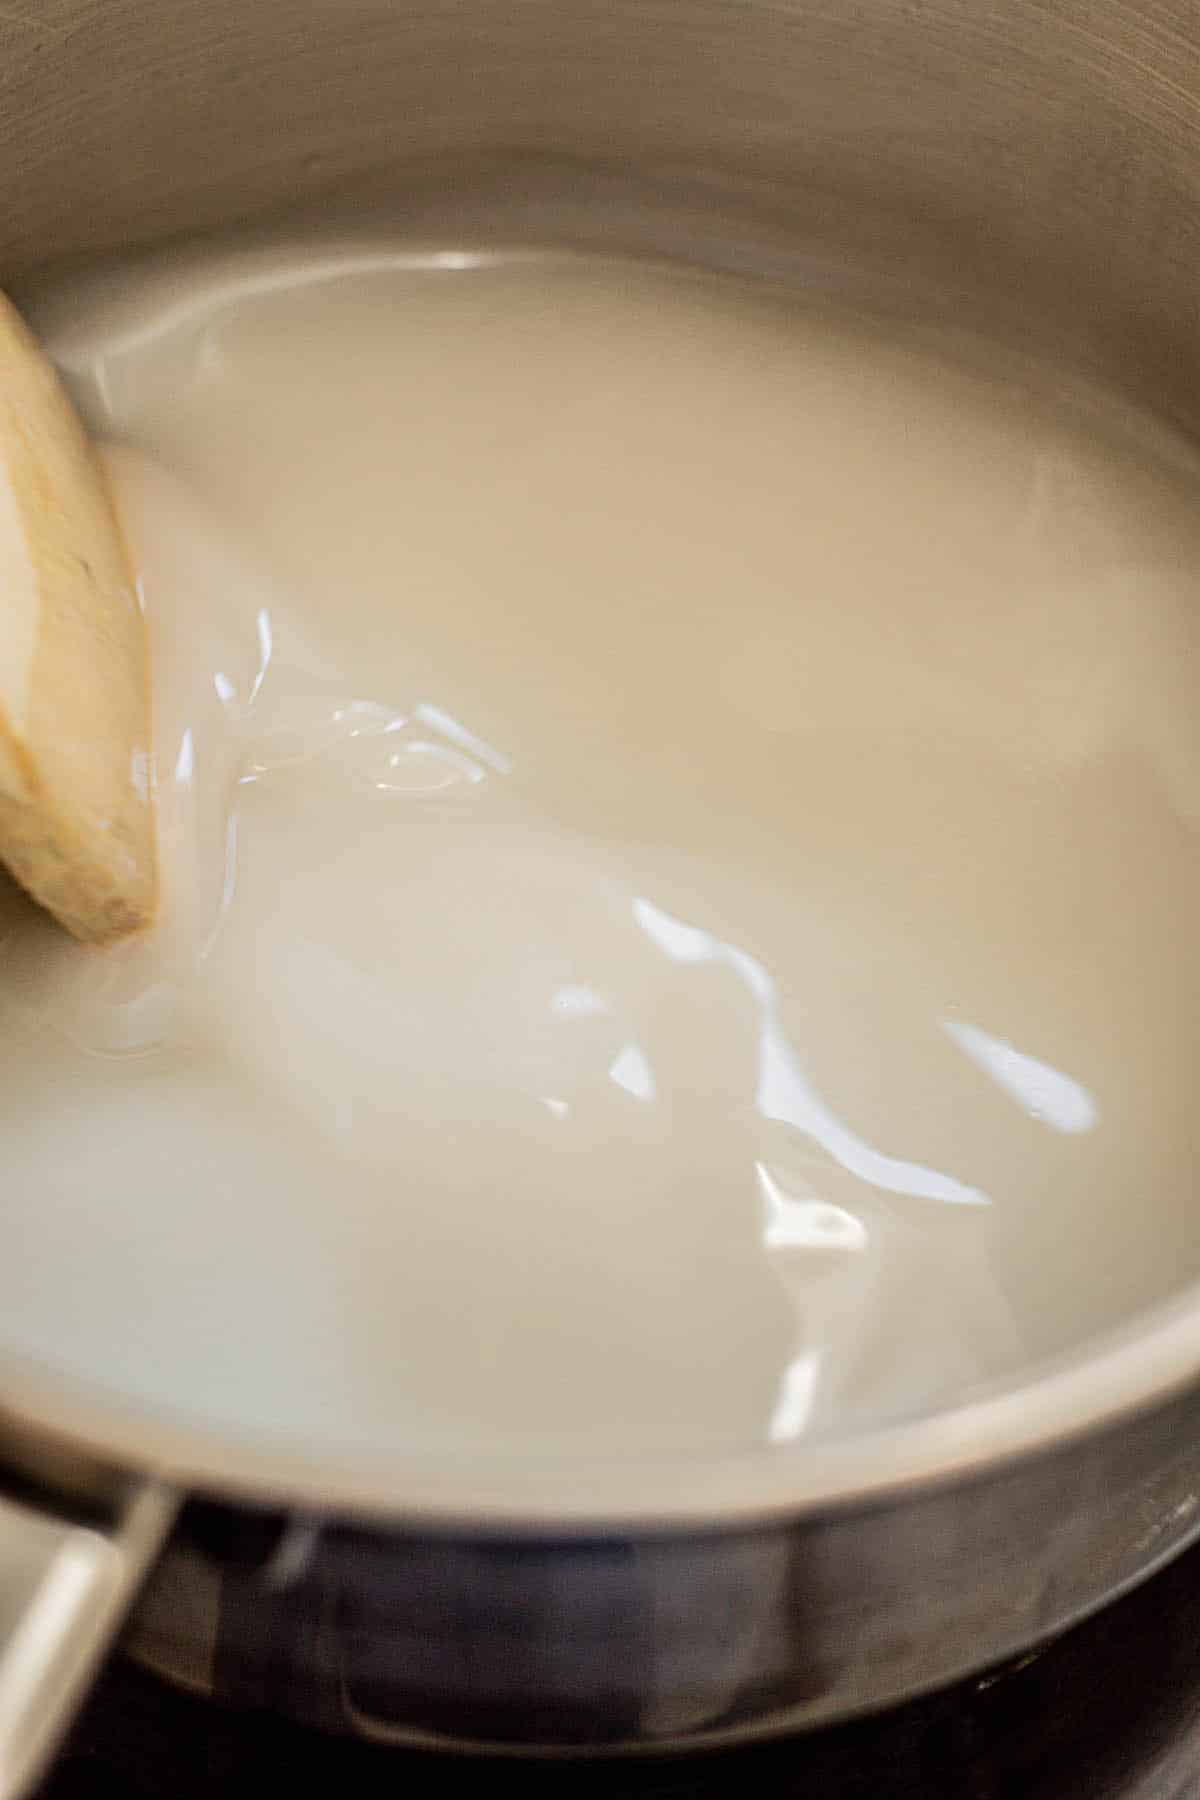 cream of coconut being stirred in a pot by wooden spoon.